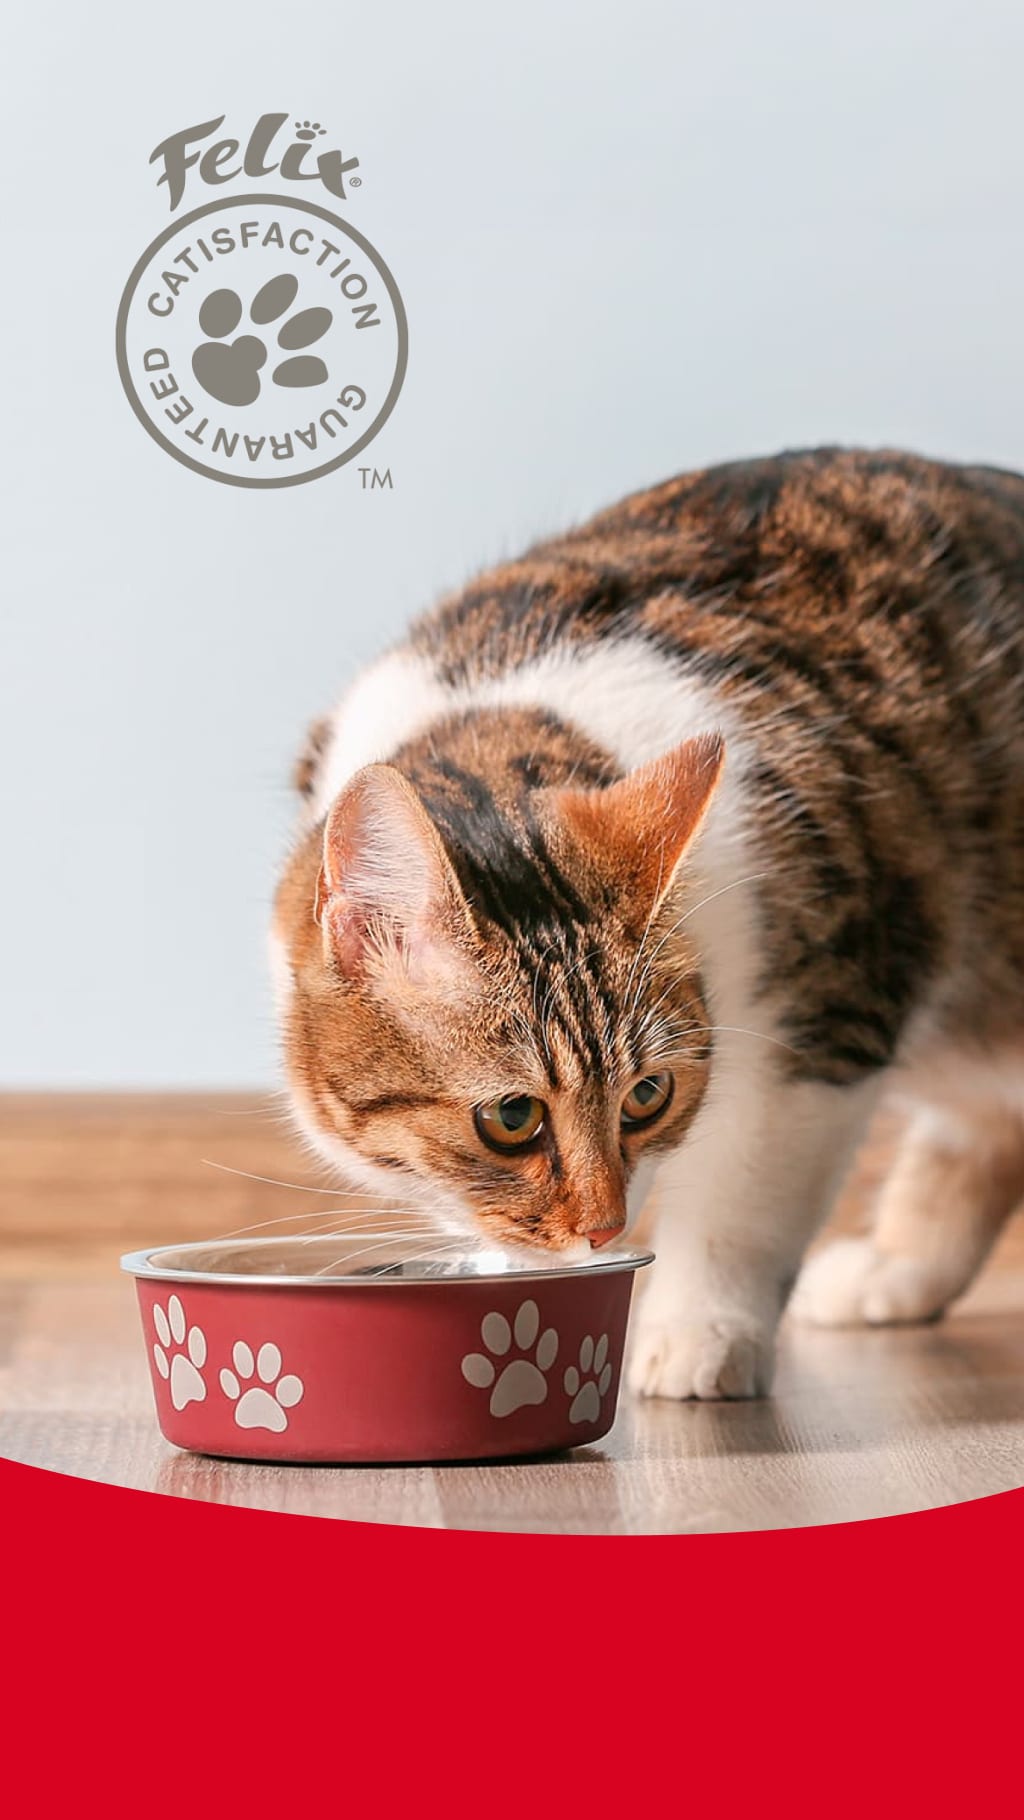 A cat approaching a bowl of catfood.